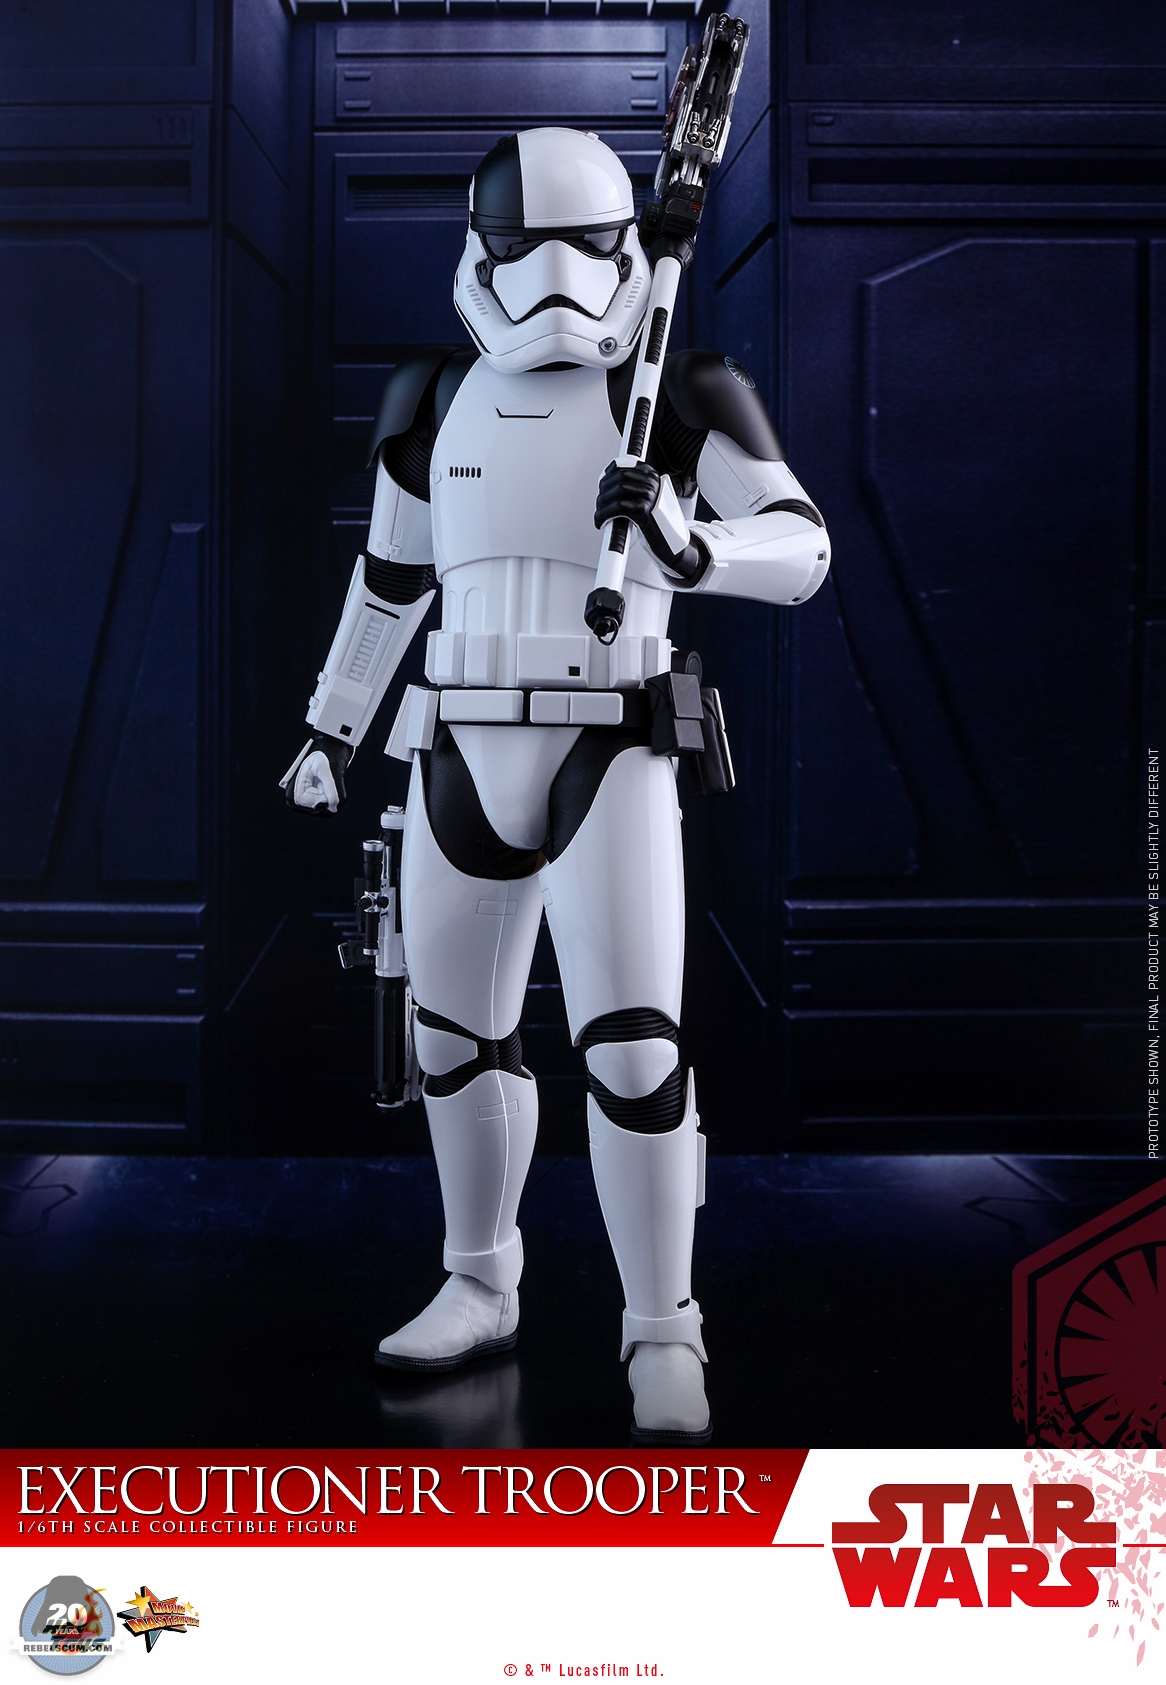 Hot-Toys-MMS248-The-Last-Jedi-Executioner-Trooper-005.jpg